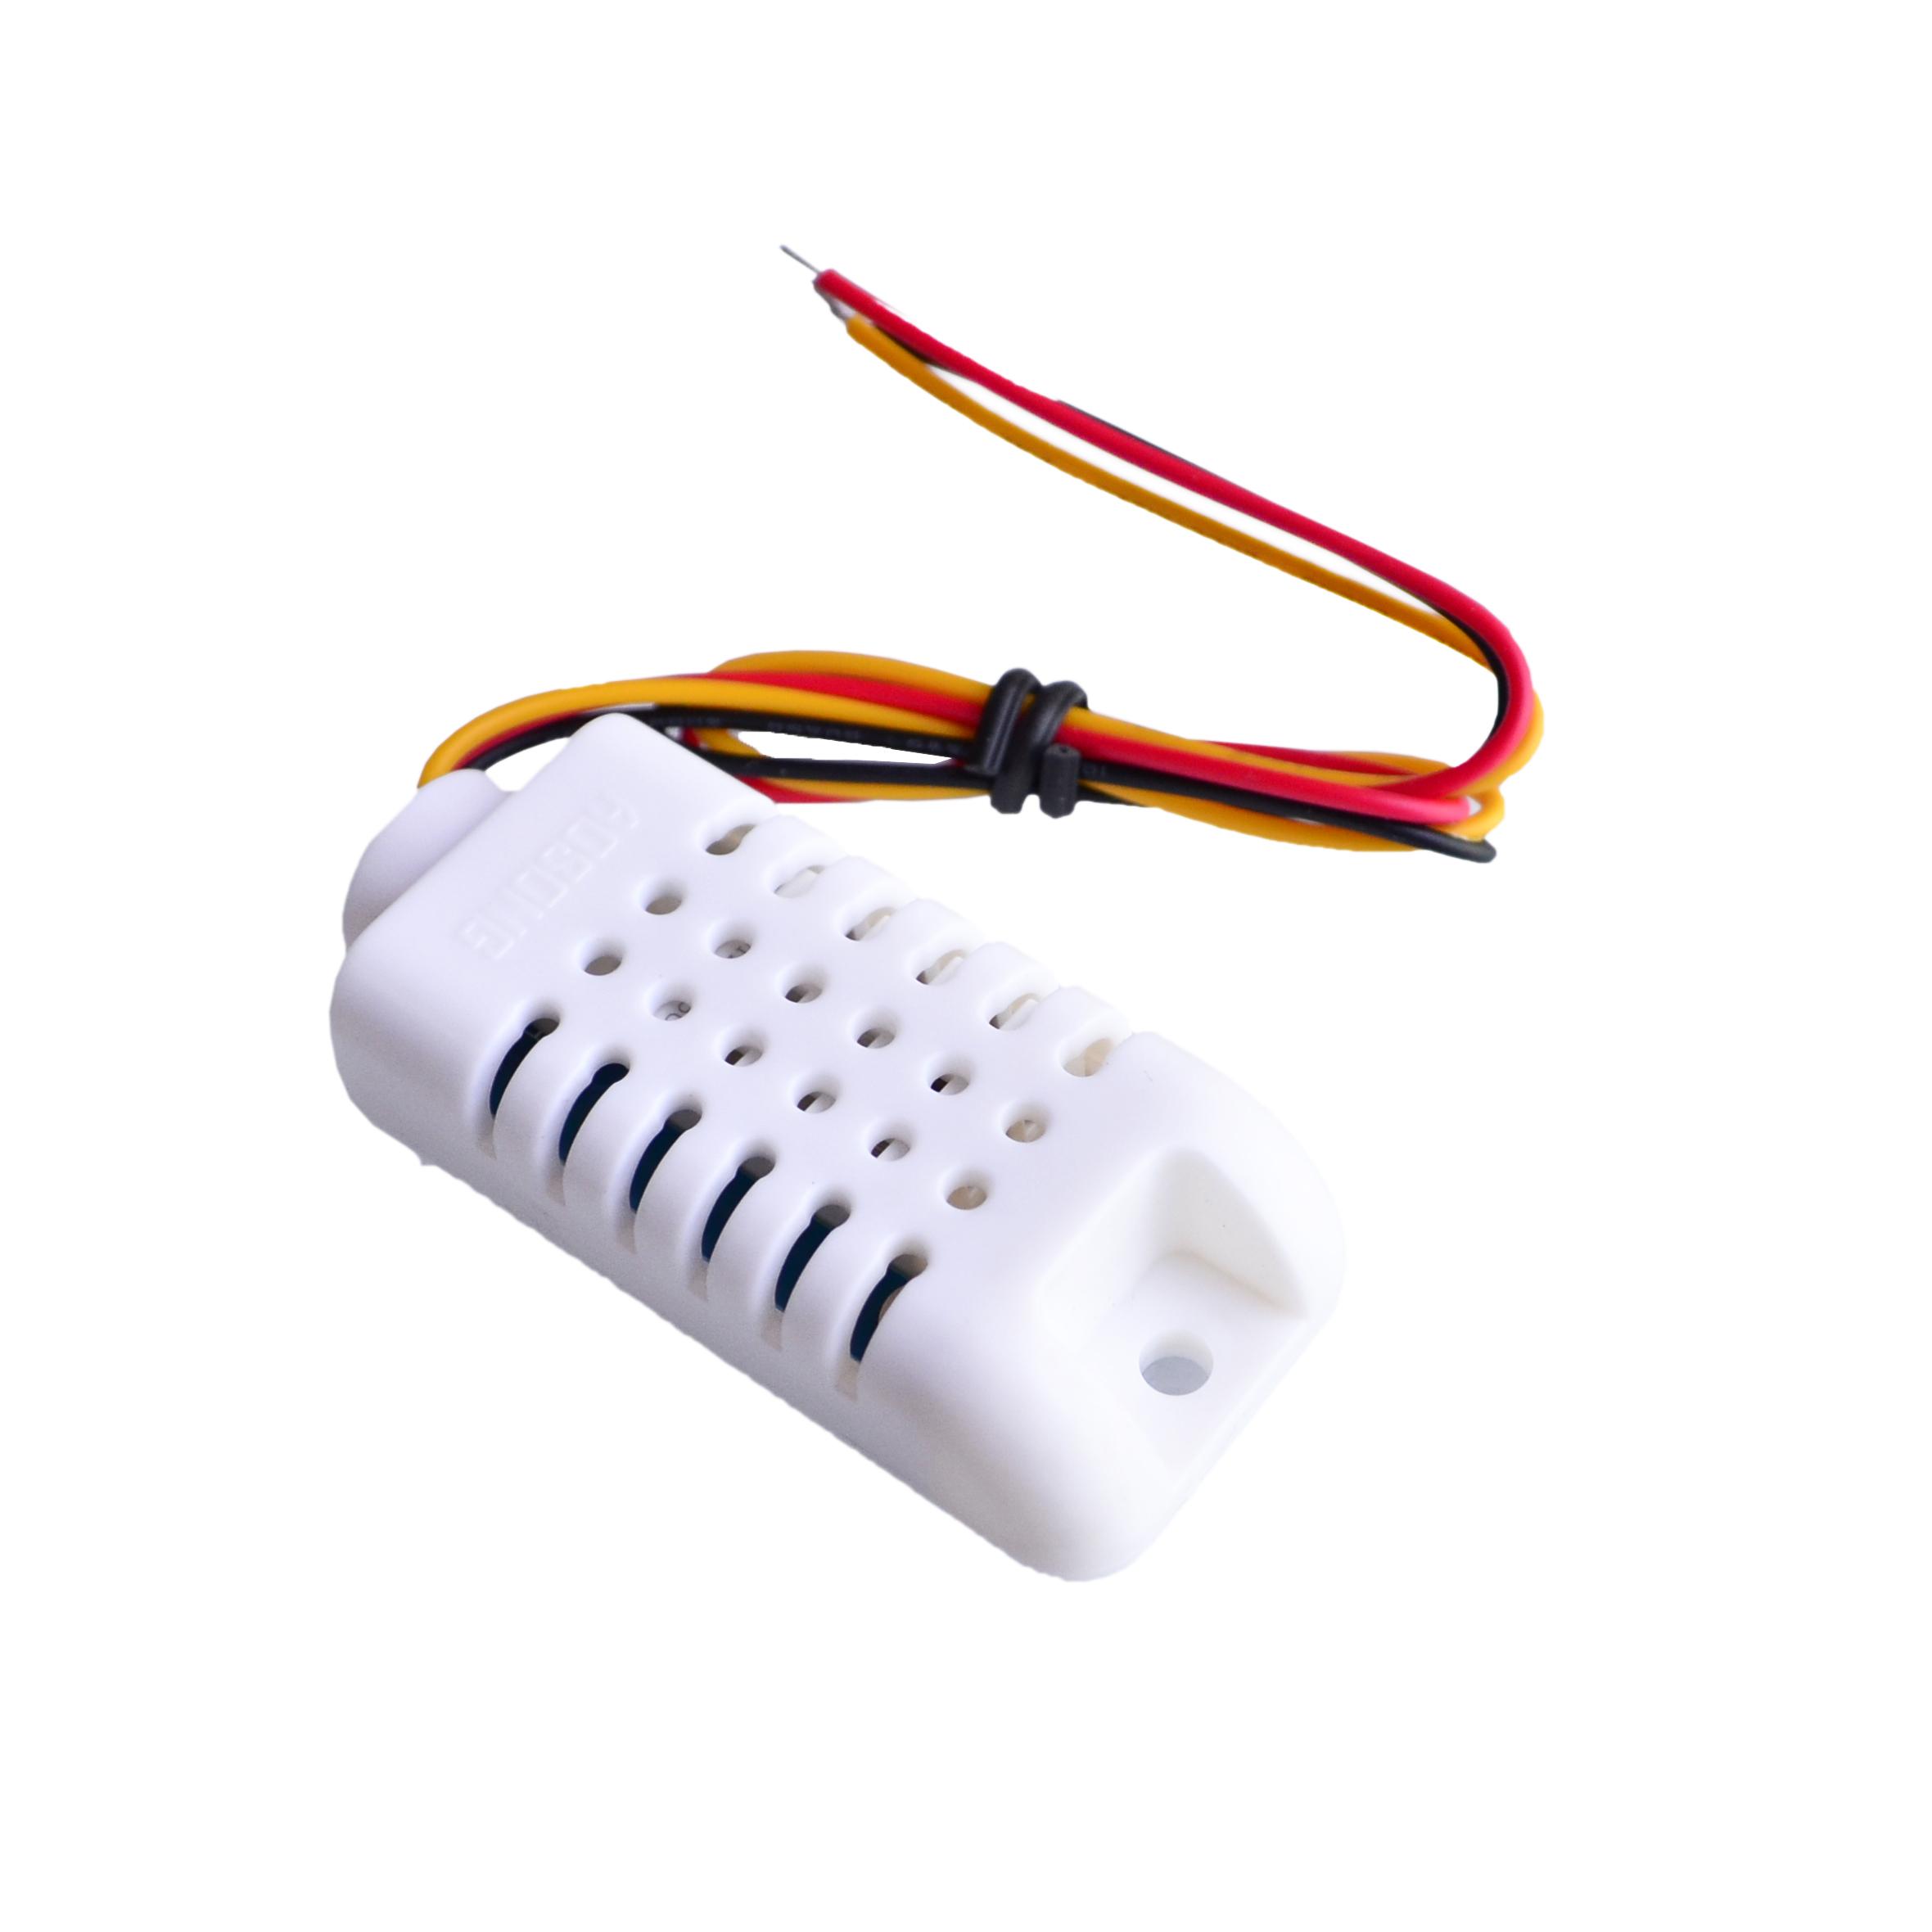 1PCSX-Wired-DHT22-AM2302-Digital-Temperature-and-Humidity-Sensor-AM2302